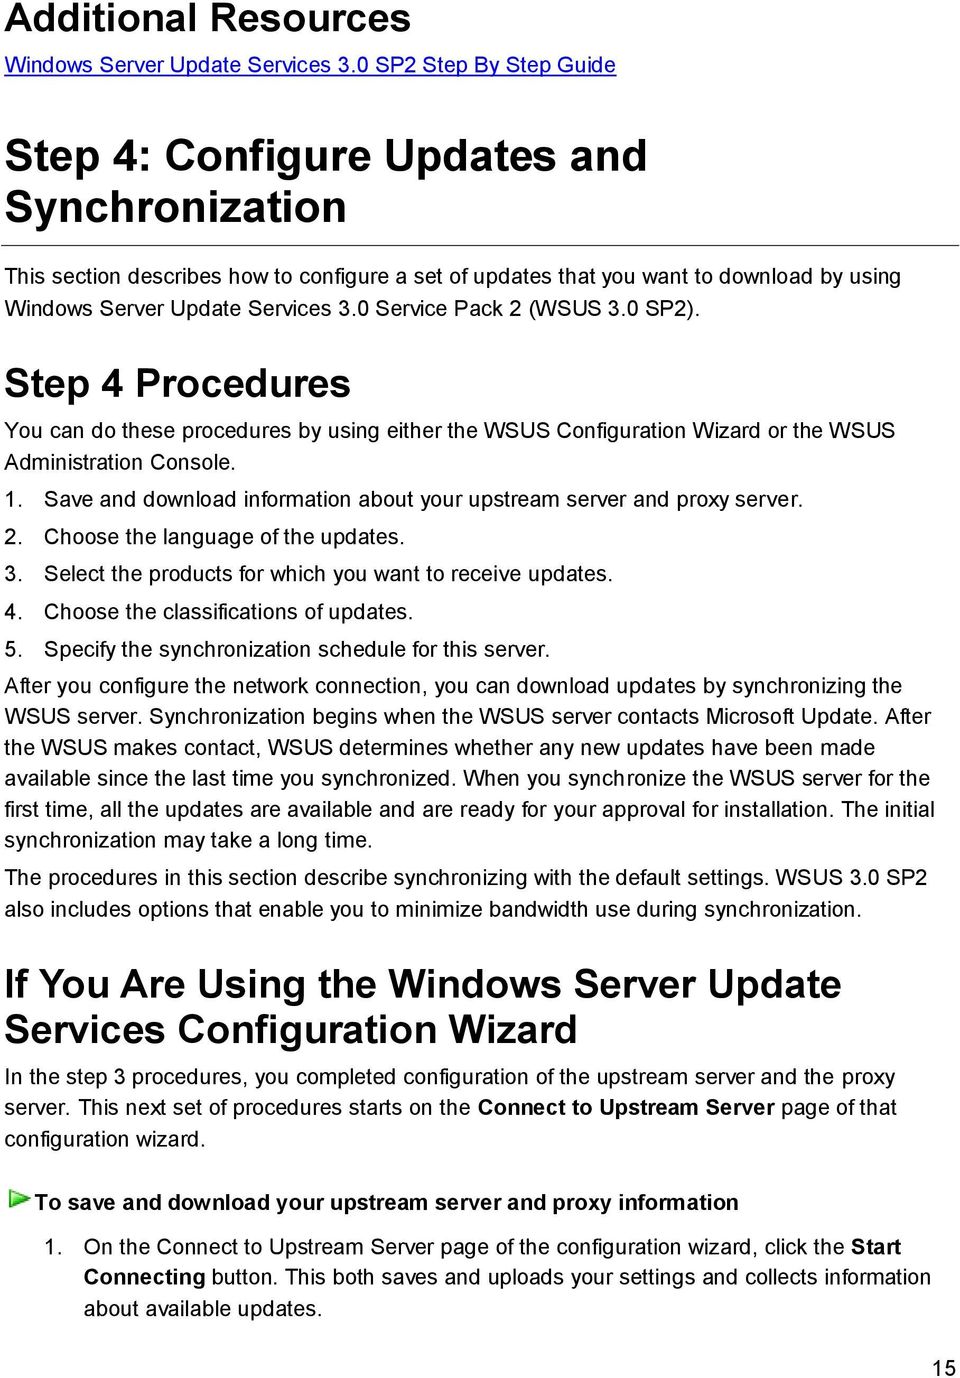 0 Service Pack 2 (WSUS 3.0 SP2). Step 4 Procedures You can do these procedures by using either the WSUS Configuration Wizard or the WSUS Administration Console. 1.